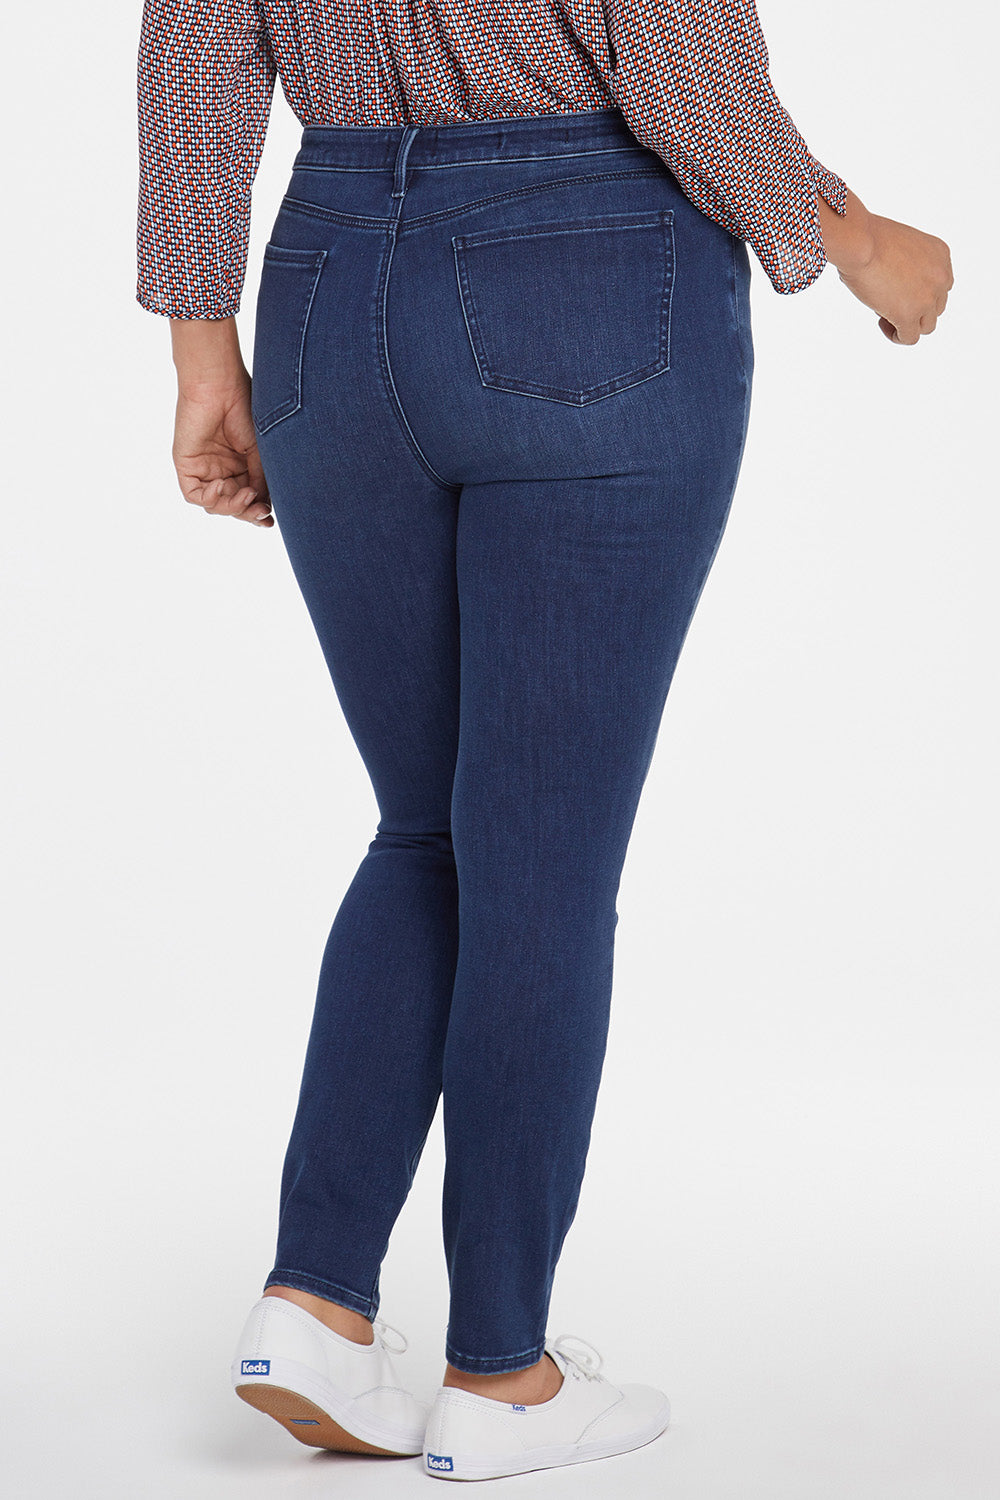 NYDJ Ami Skinny Jeans In Plus Size With High Rise - Grant